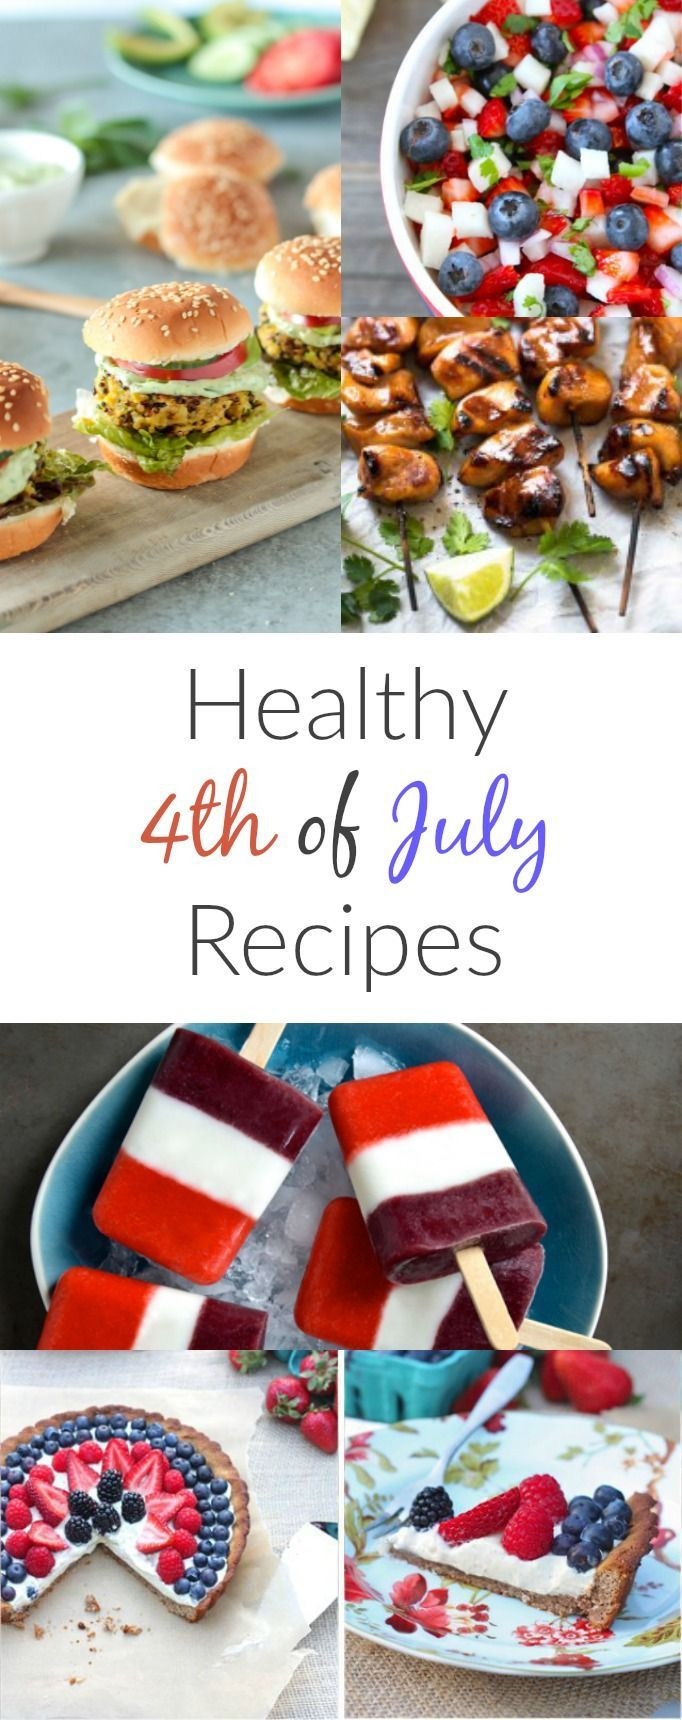 Fourth Of July Food Pinterest
 17 Best images about Fourth of July Recipes Decorations